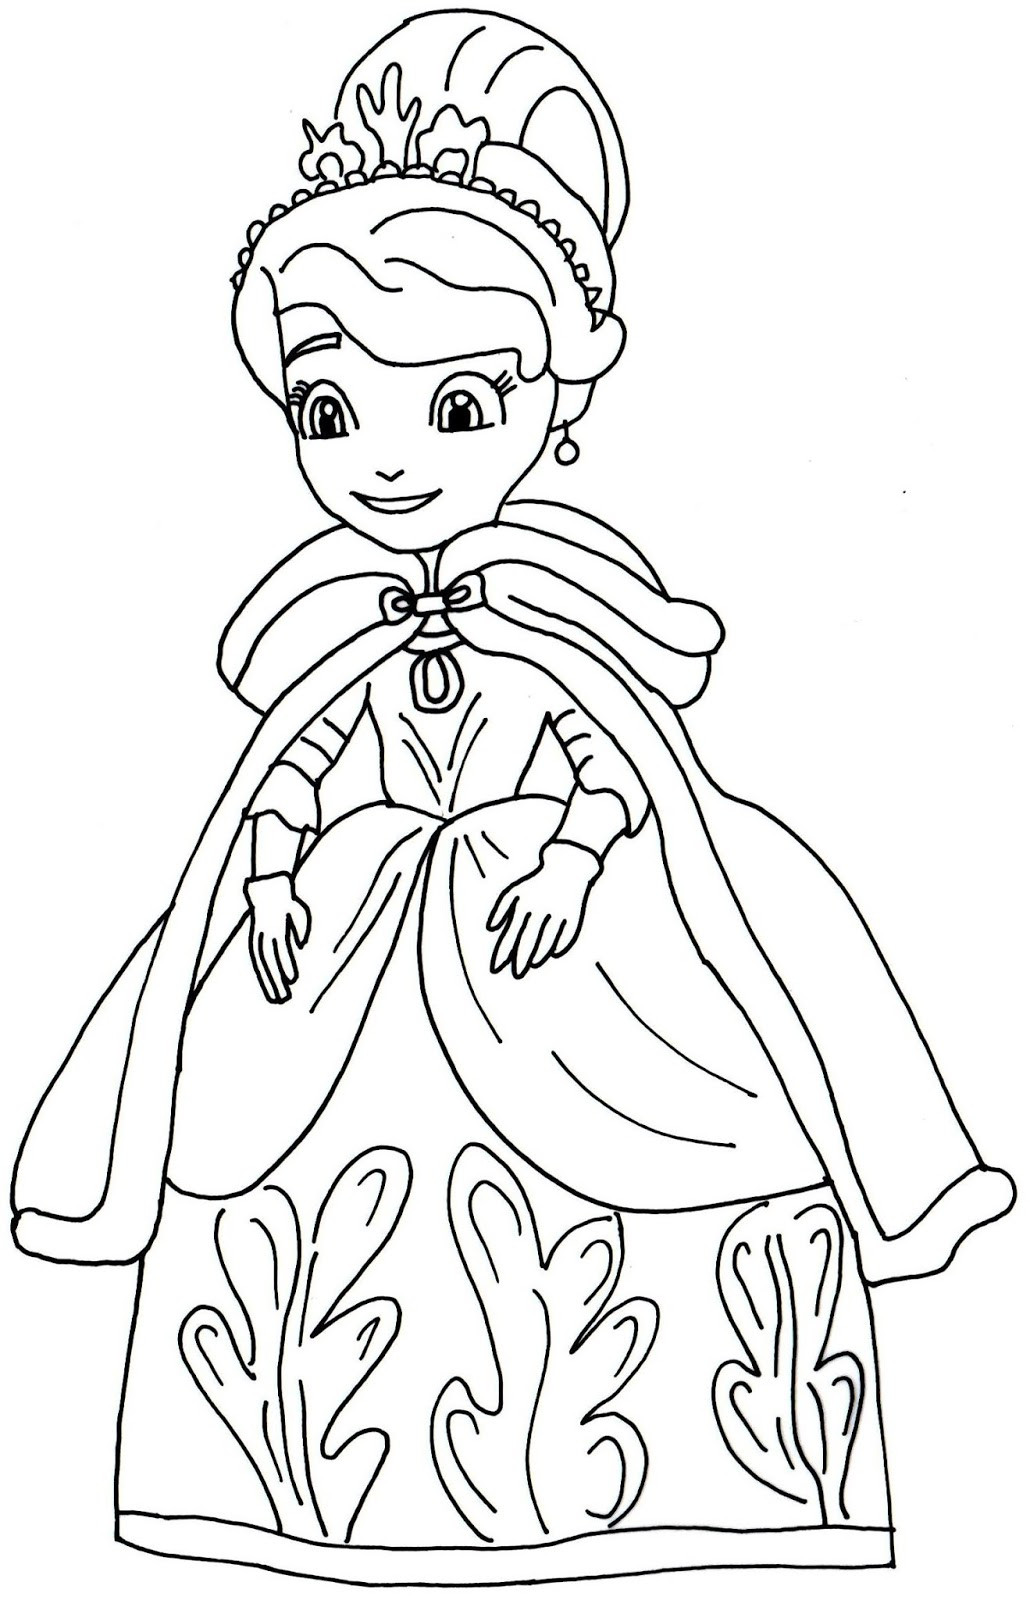 Sofia The First Printable Coloring Pages
 Sofia The First Coloring Pages Winters Gift Sofia The